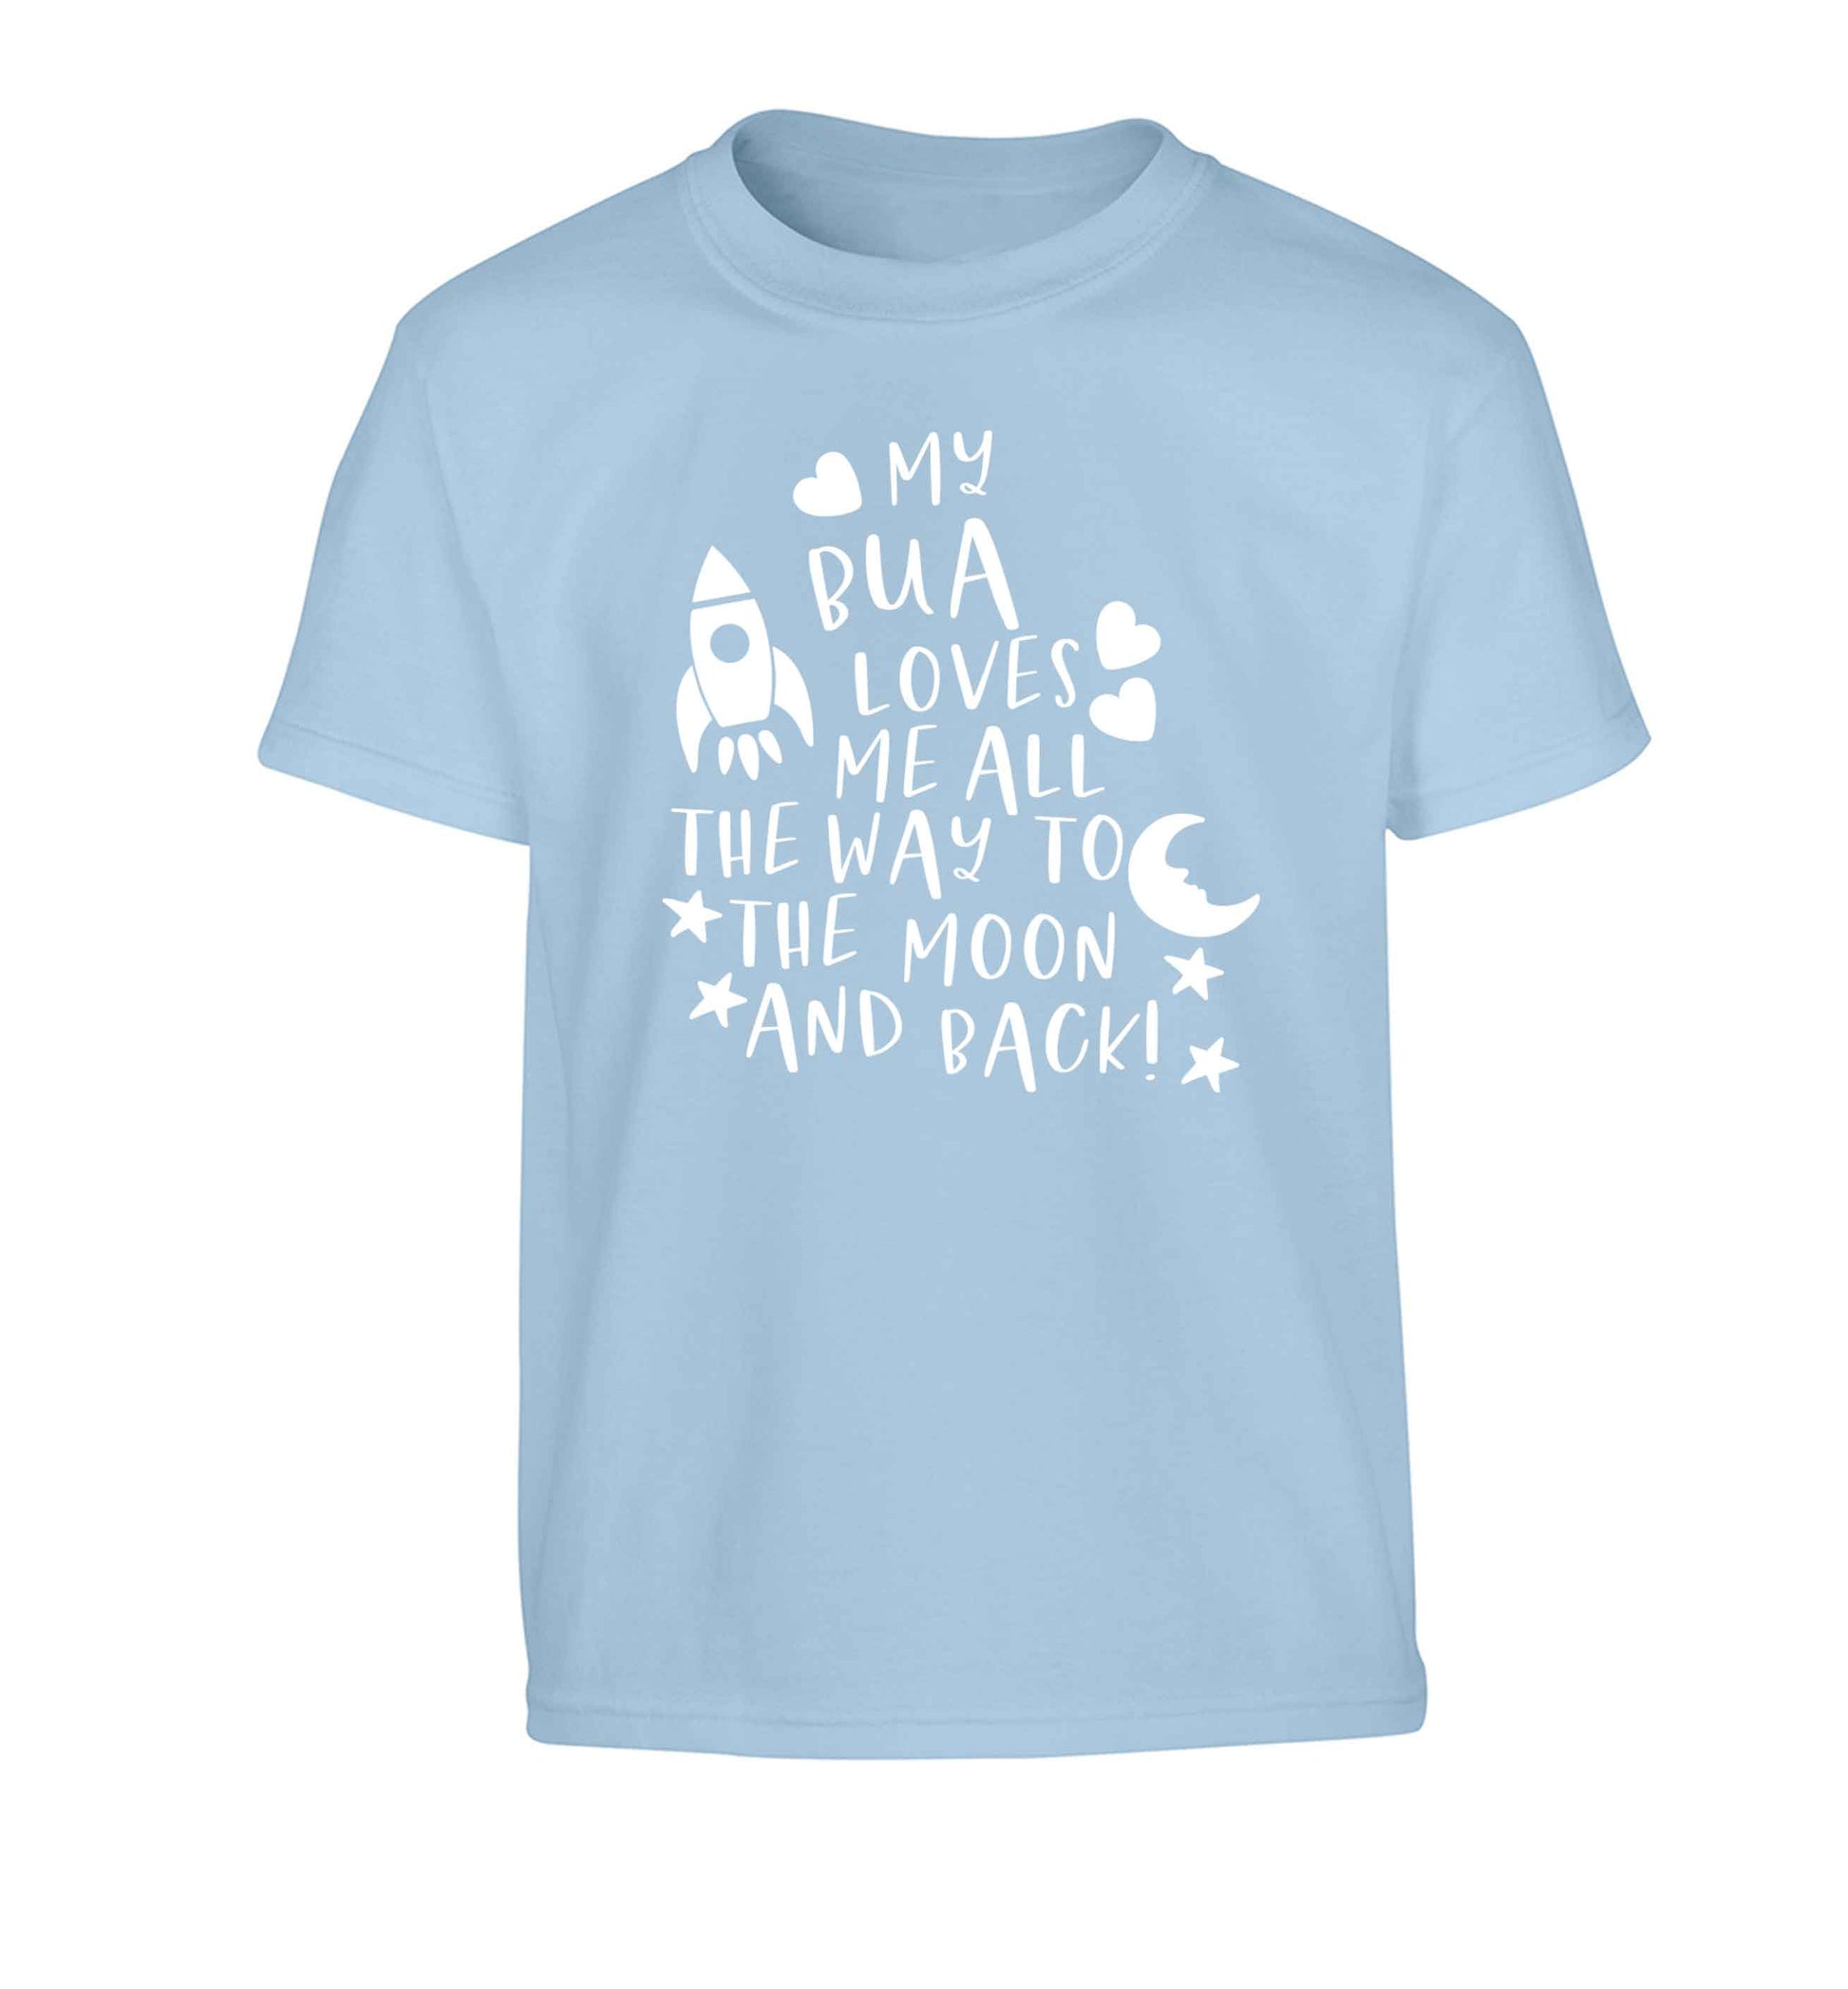 My bua loves me all they way to the moon and back Children's light blue Tshirt 12-13 Years